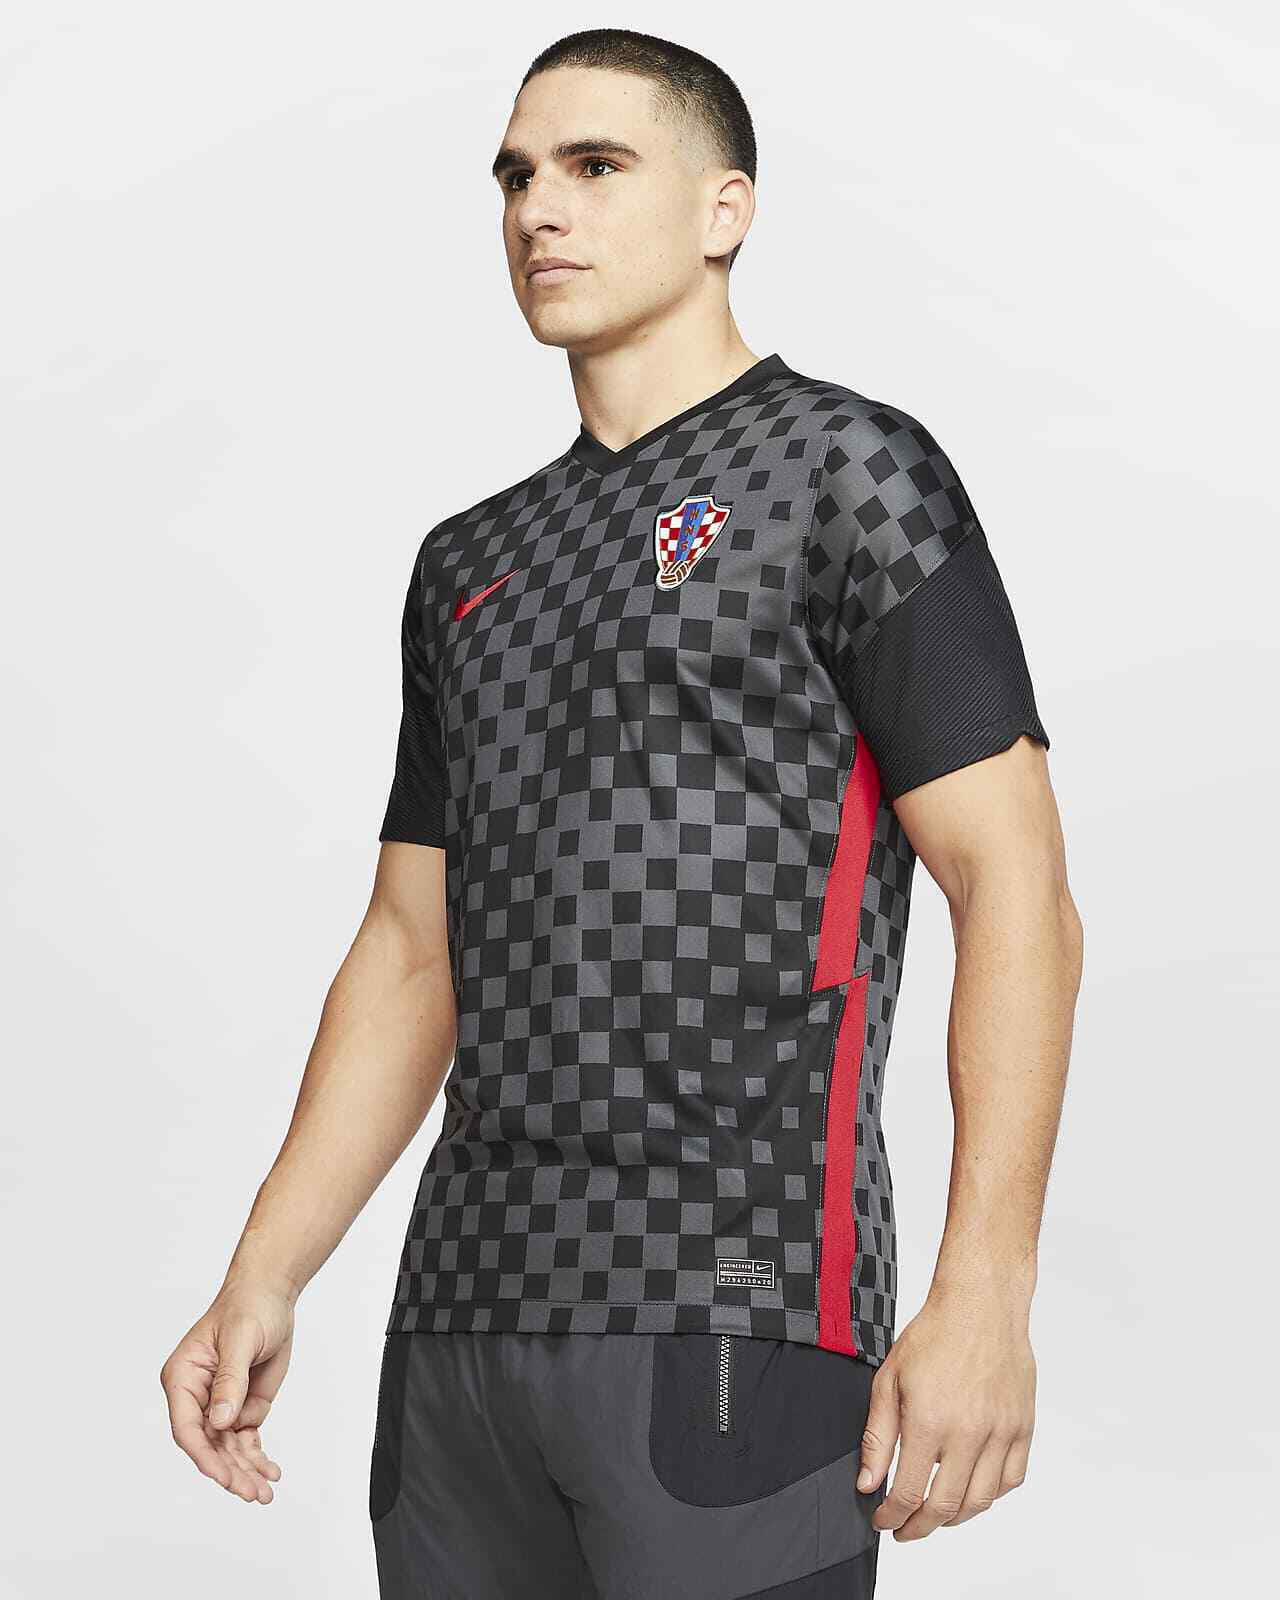 Details about   CHACARITA AWAY SOCCER JERSEY 2020 2021 ALL SIZES 